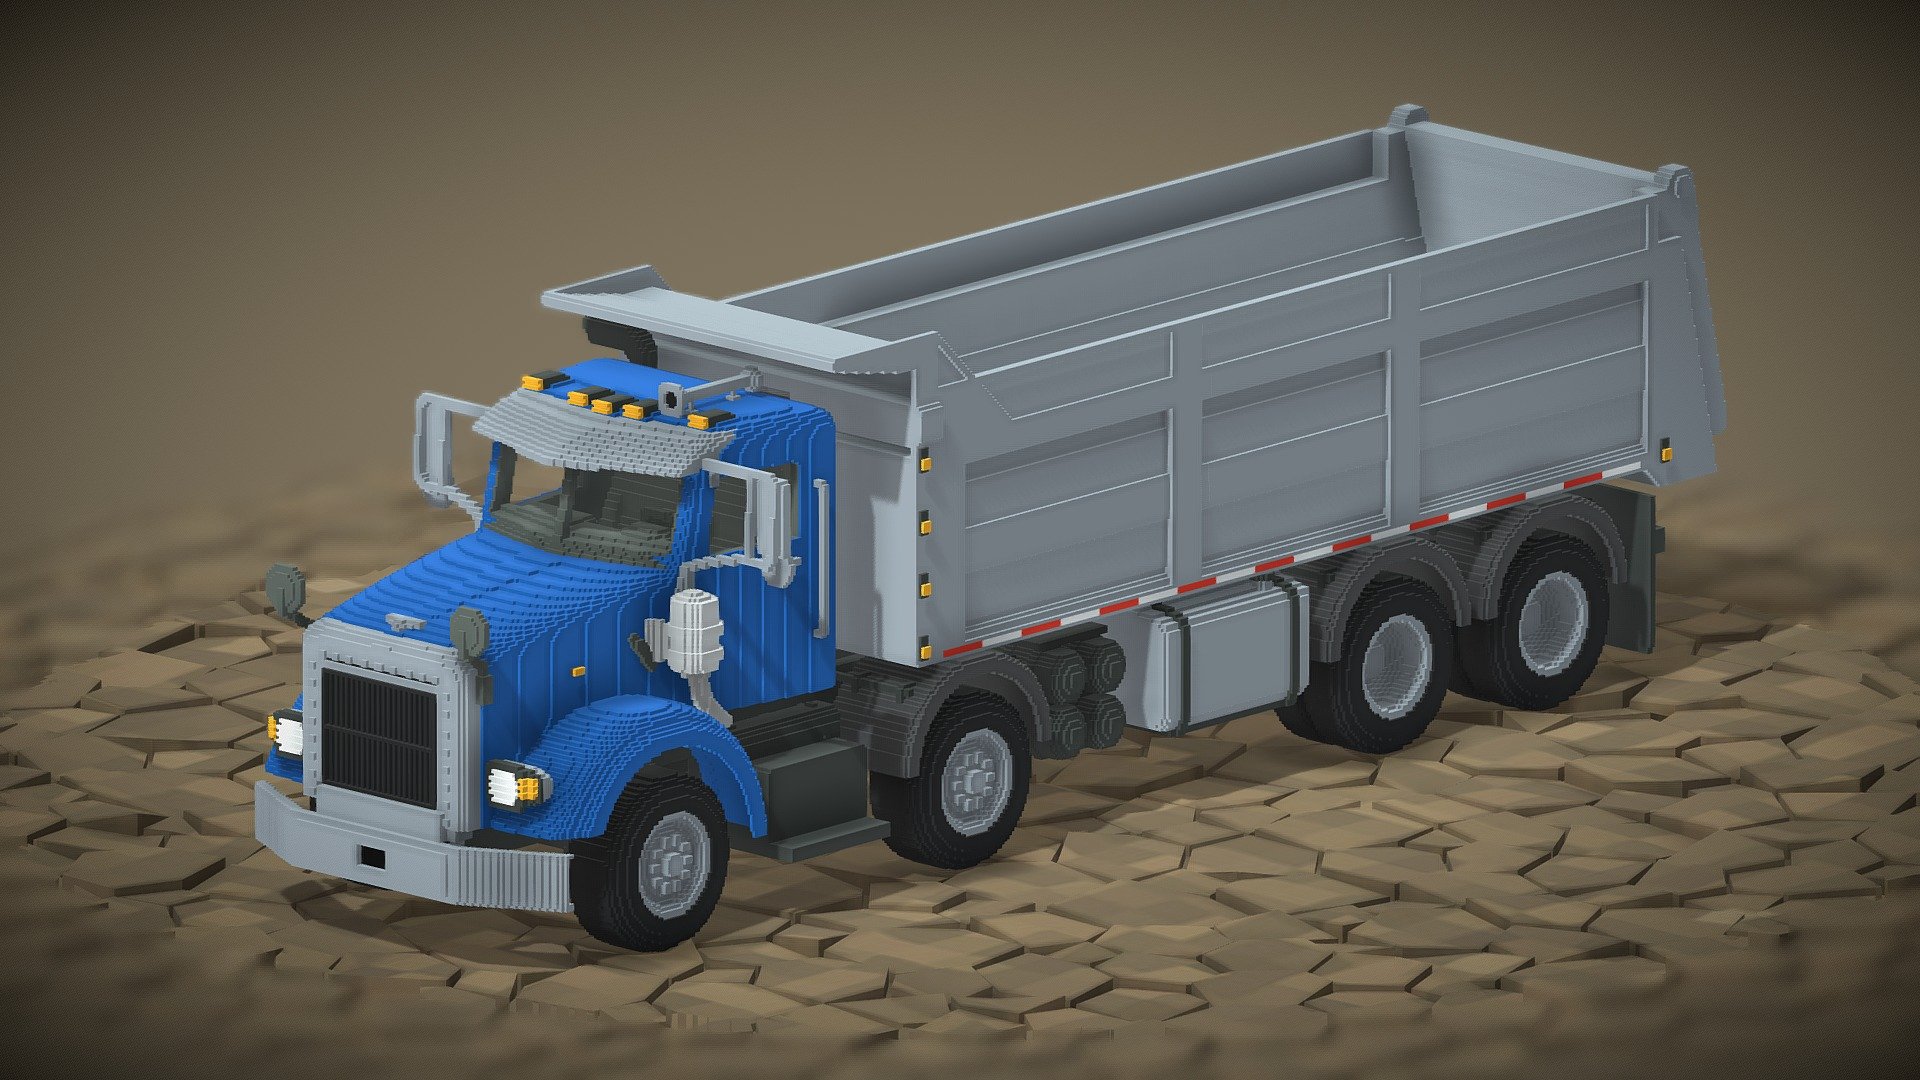 Voxel Dumper Truck high details 3D models with animation created by Shubbak3D, Modeling in MagicaVoxel Editor, animation with 3Ds Max.



This model composed of 7 parts:

Part 1 – Truck Cabin (Voxel Size = 255 x 141 x 130)

Part 2 – Back part of the truck (Voxel Size = 215 x 121 x 53)

Part 3 – Dumper Box Part 1 (Voxel Size = 155 x 115 x 101)

Part 4 – Dumper Box Part 2 (Voxel Size = 216 x 115 x 90)

Part 5 – Dumper Box Part 3 (Voxel Size = 25 x 109 x 79)

Part 6 - Front Wheels x4 (Voxel Size = 50 x 20 x 50)

Part 7 - Back Wheels x4 (Voxel Size = 50 x 29 x 50)



All Formats Size: 74.8 MB

Zip File Size: 9.44 MB

(Polys Count: 239496) (Verts Count: 356557)

Available Formats: .vox (MagicaVoxel) .max (3ds max 2021 default with animation) .qb .obj + mtl .fbx

Your feedback and rating are important for us 🙂 - Voxel Dumper Truck With Animation - Buy Royalty Free 3D model by SHUBBAK3D 3d model